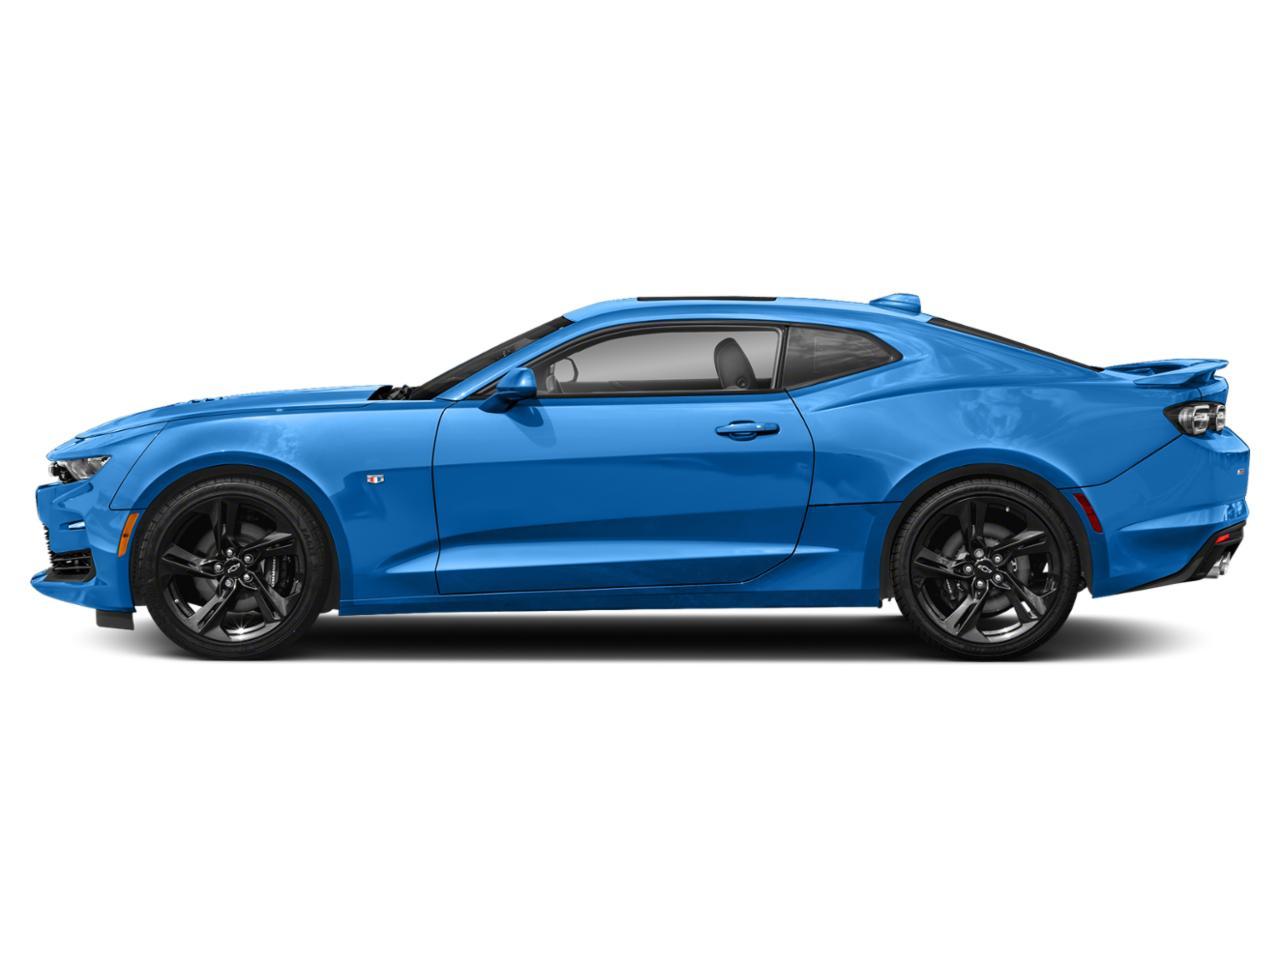 New 2024 Chevrolet Camaro 2dr Coupe 1SS in Blue for sale in SAINT